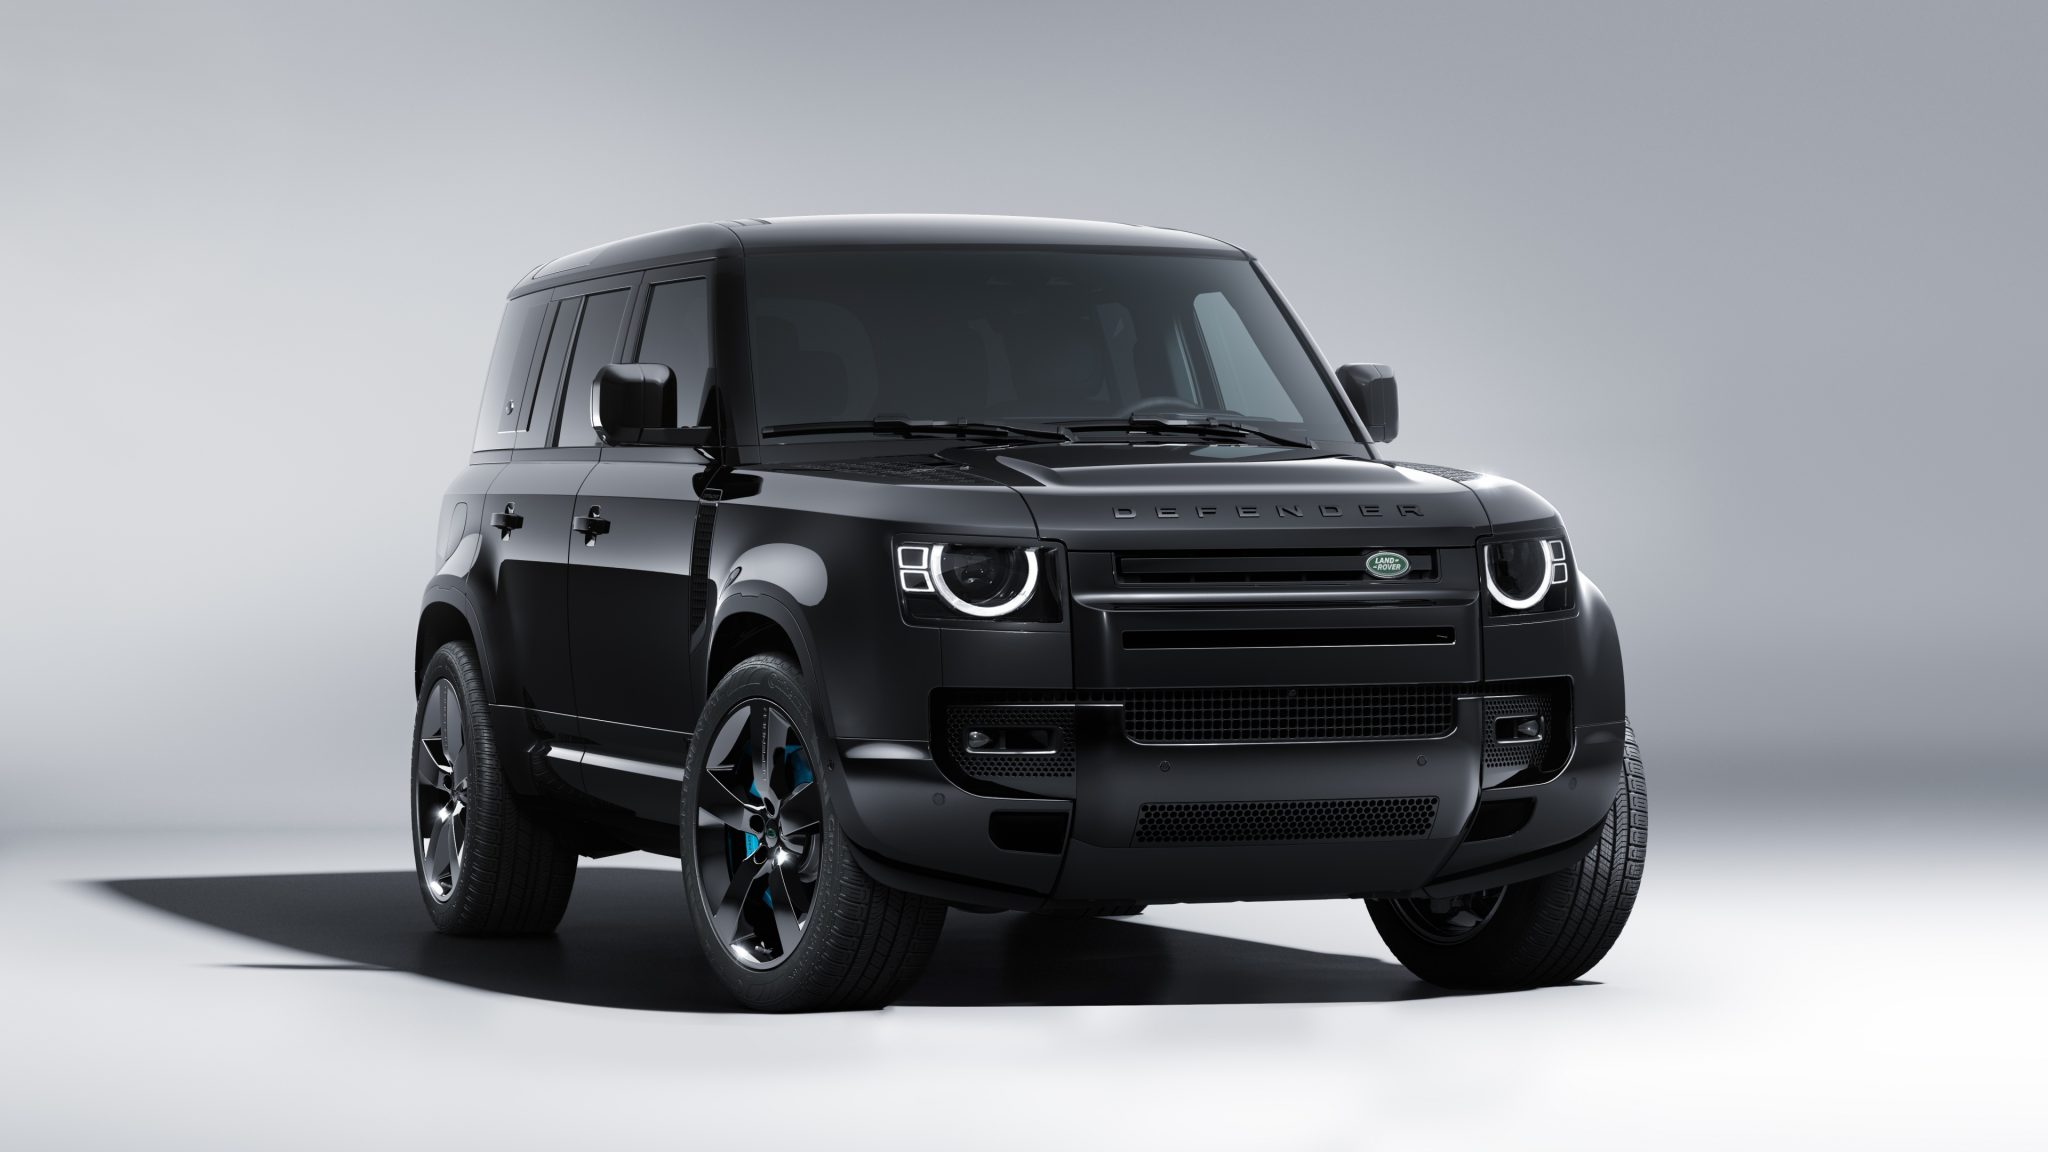 Defender to Range Rover: All Land Rover Cars Sold In India, Land